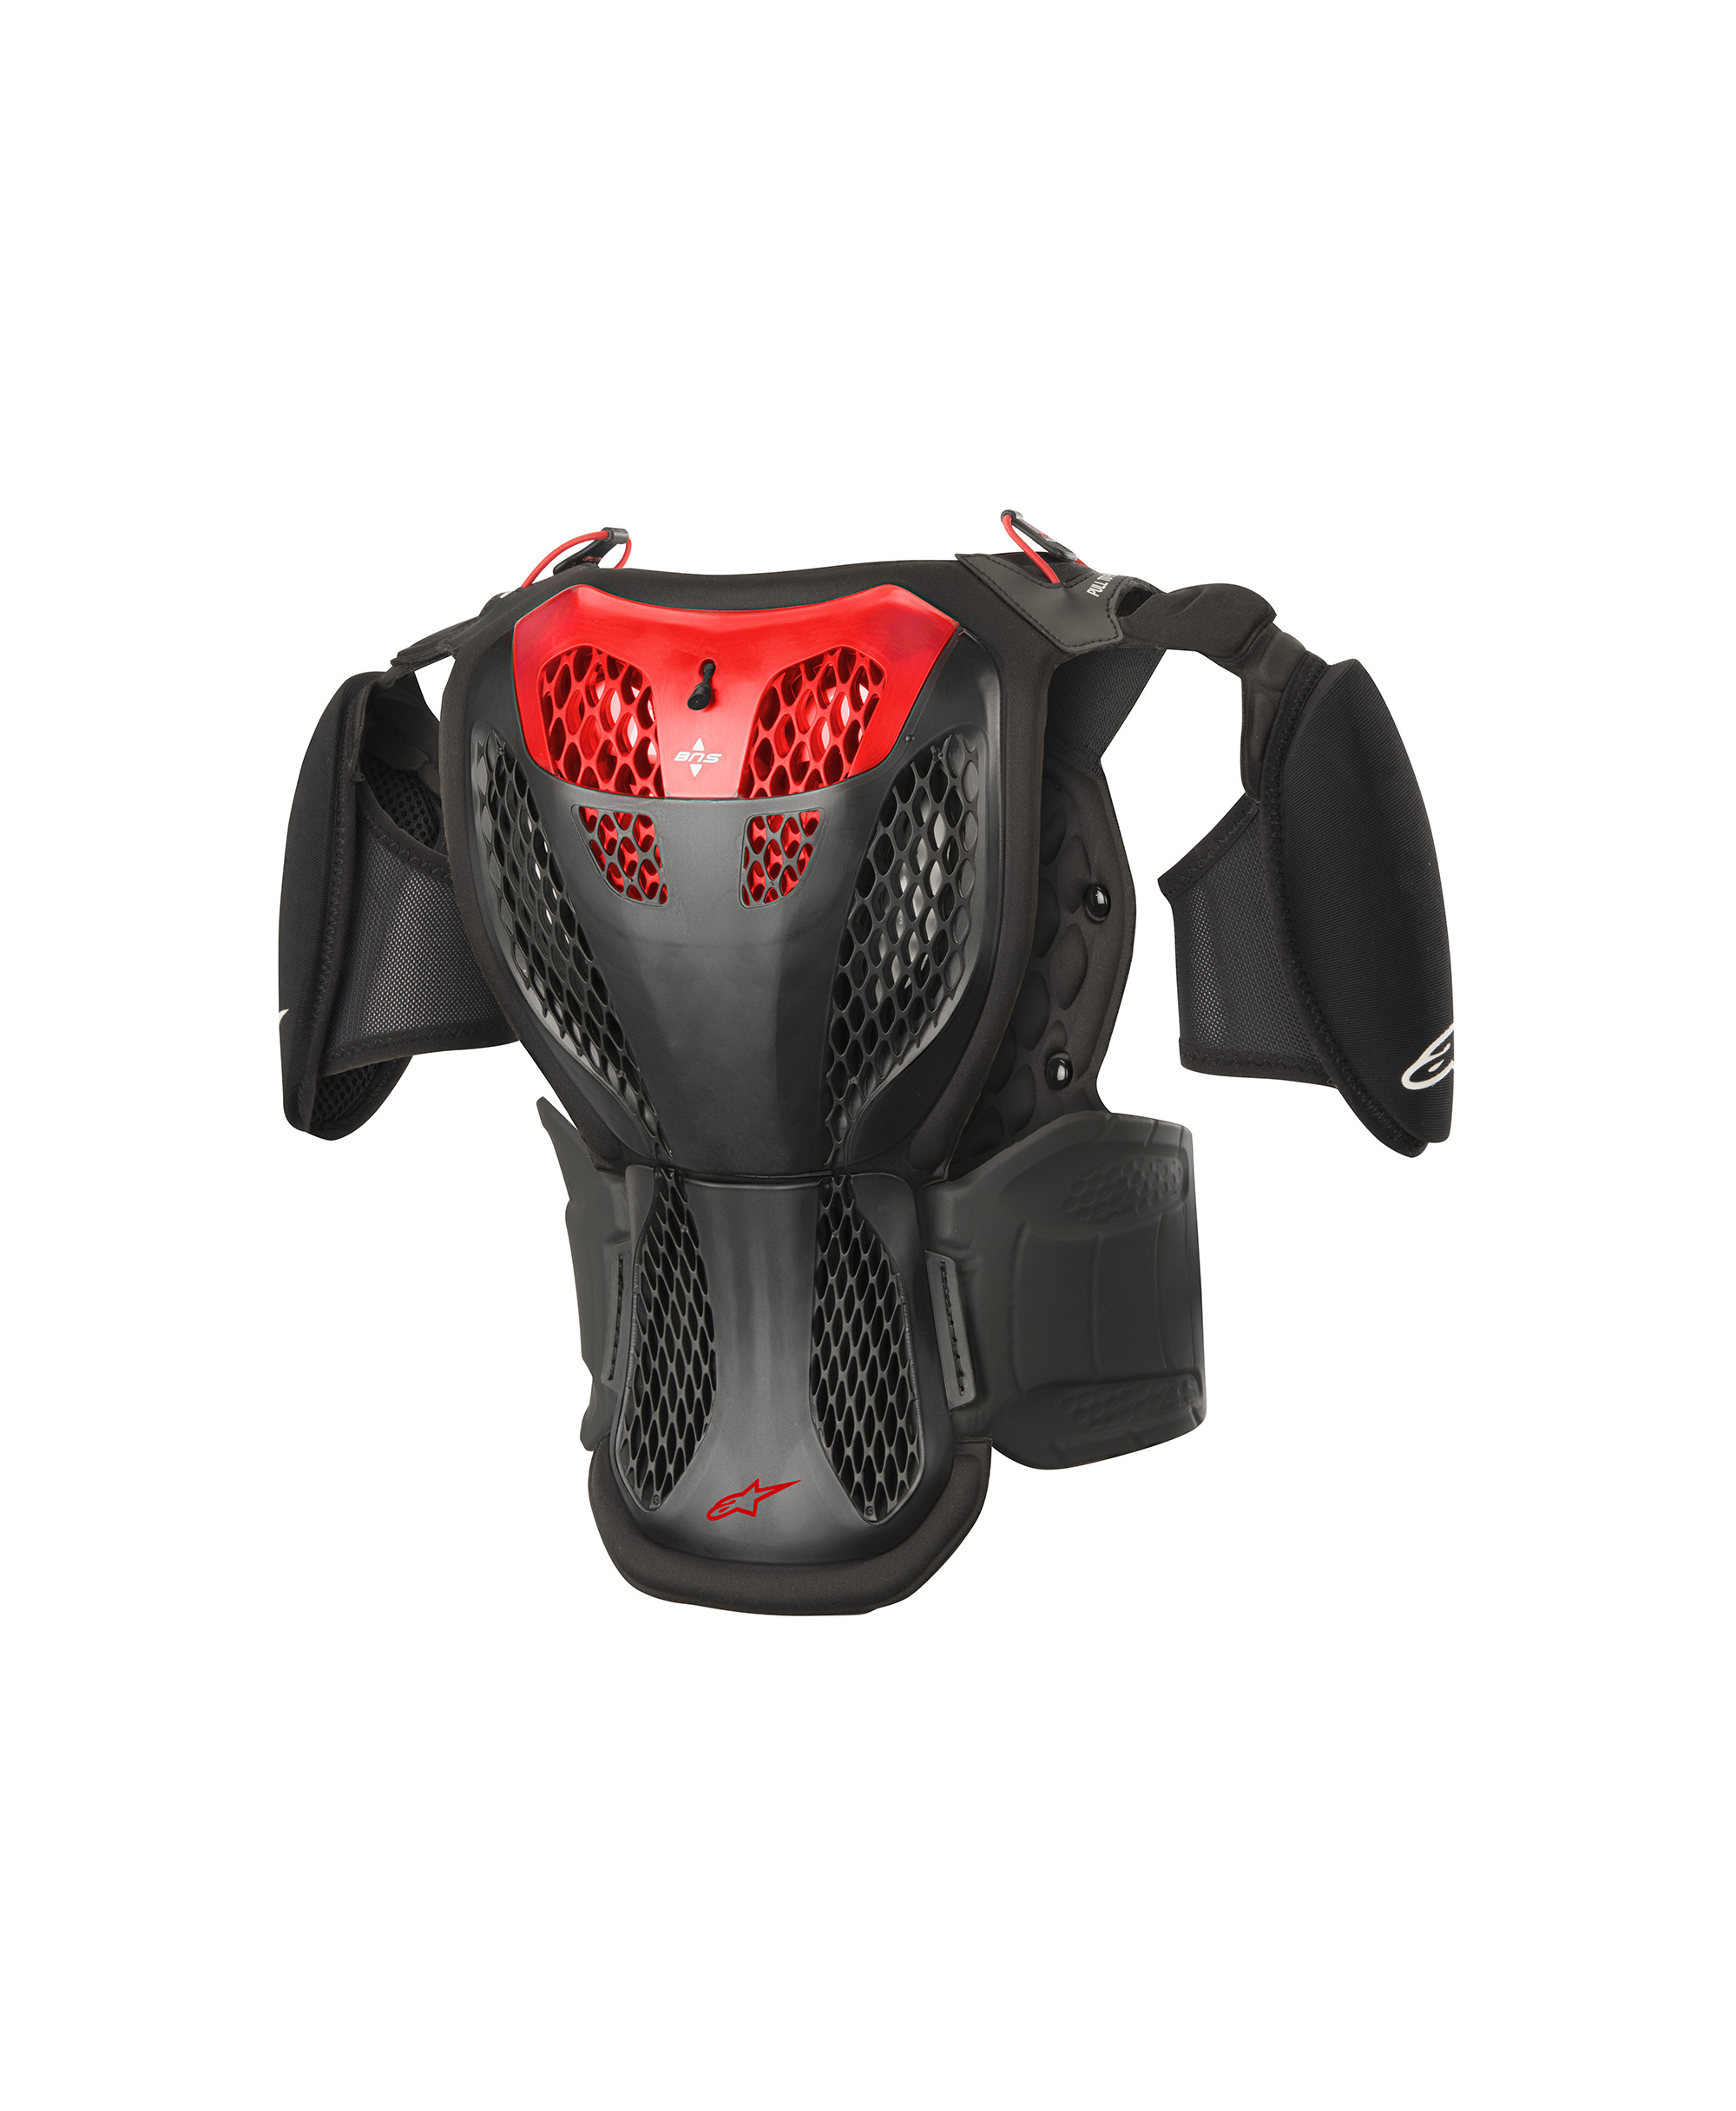 A-5 S YOUTH BODY ARMOUR BLACK RED